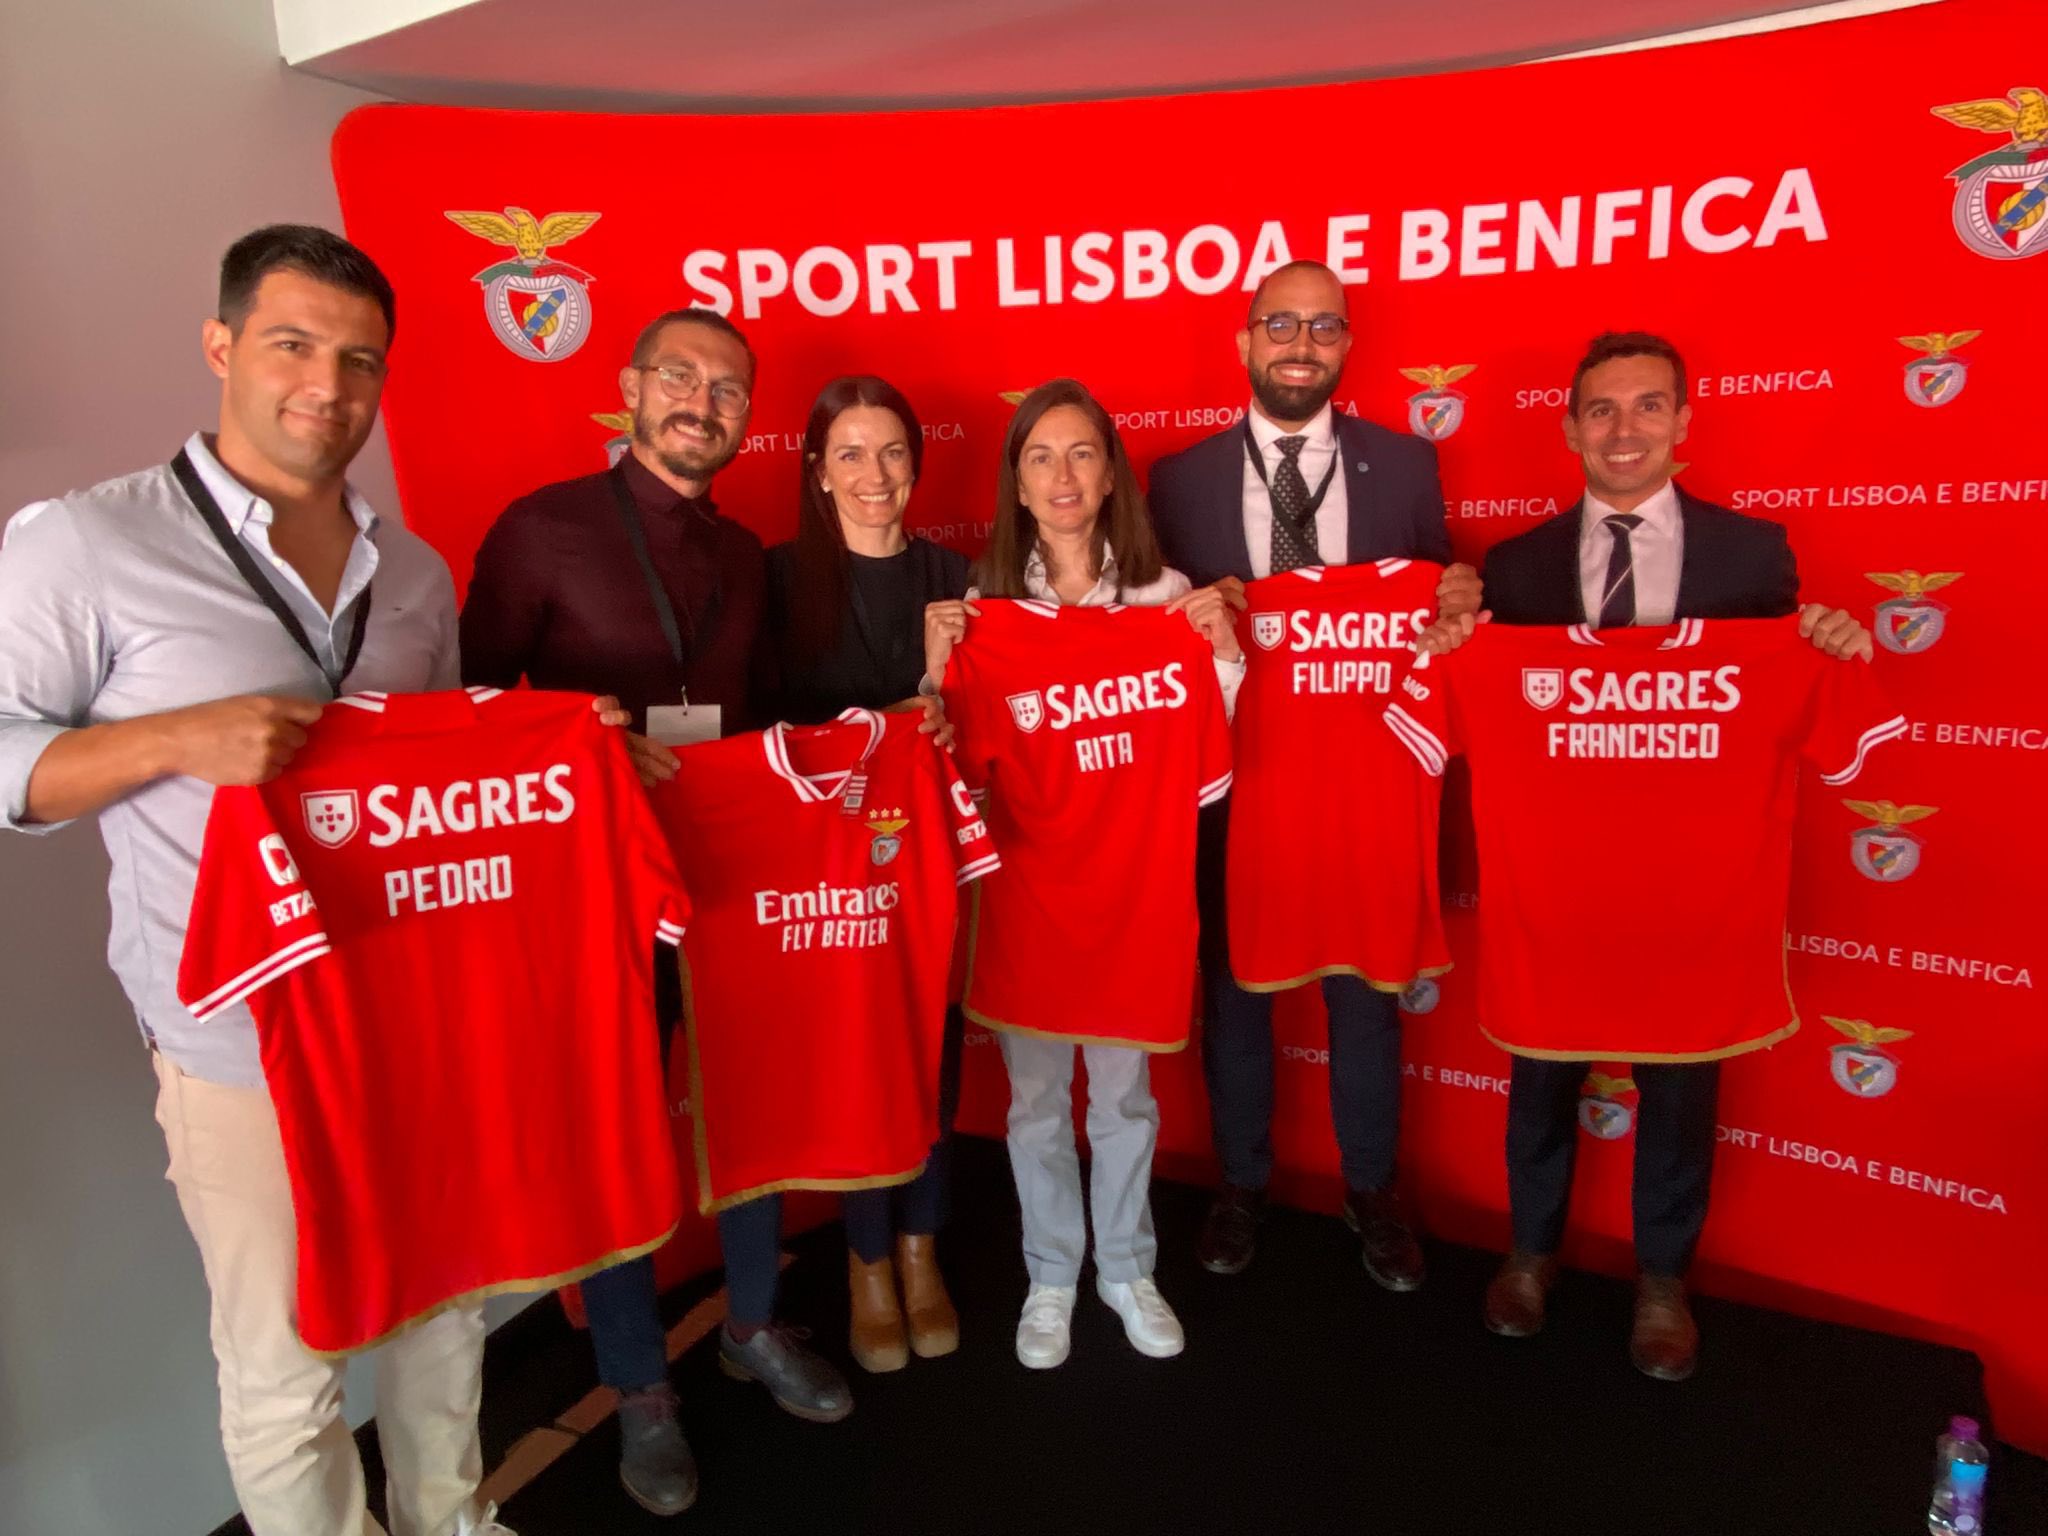 Lisboa, Portugal. 27th May, 2023. SL Benfica players poses with